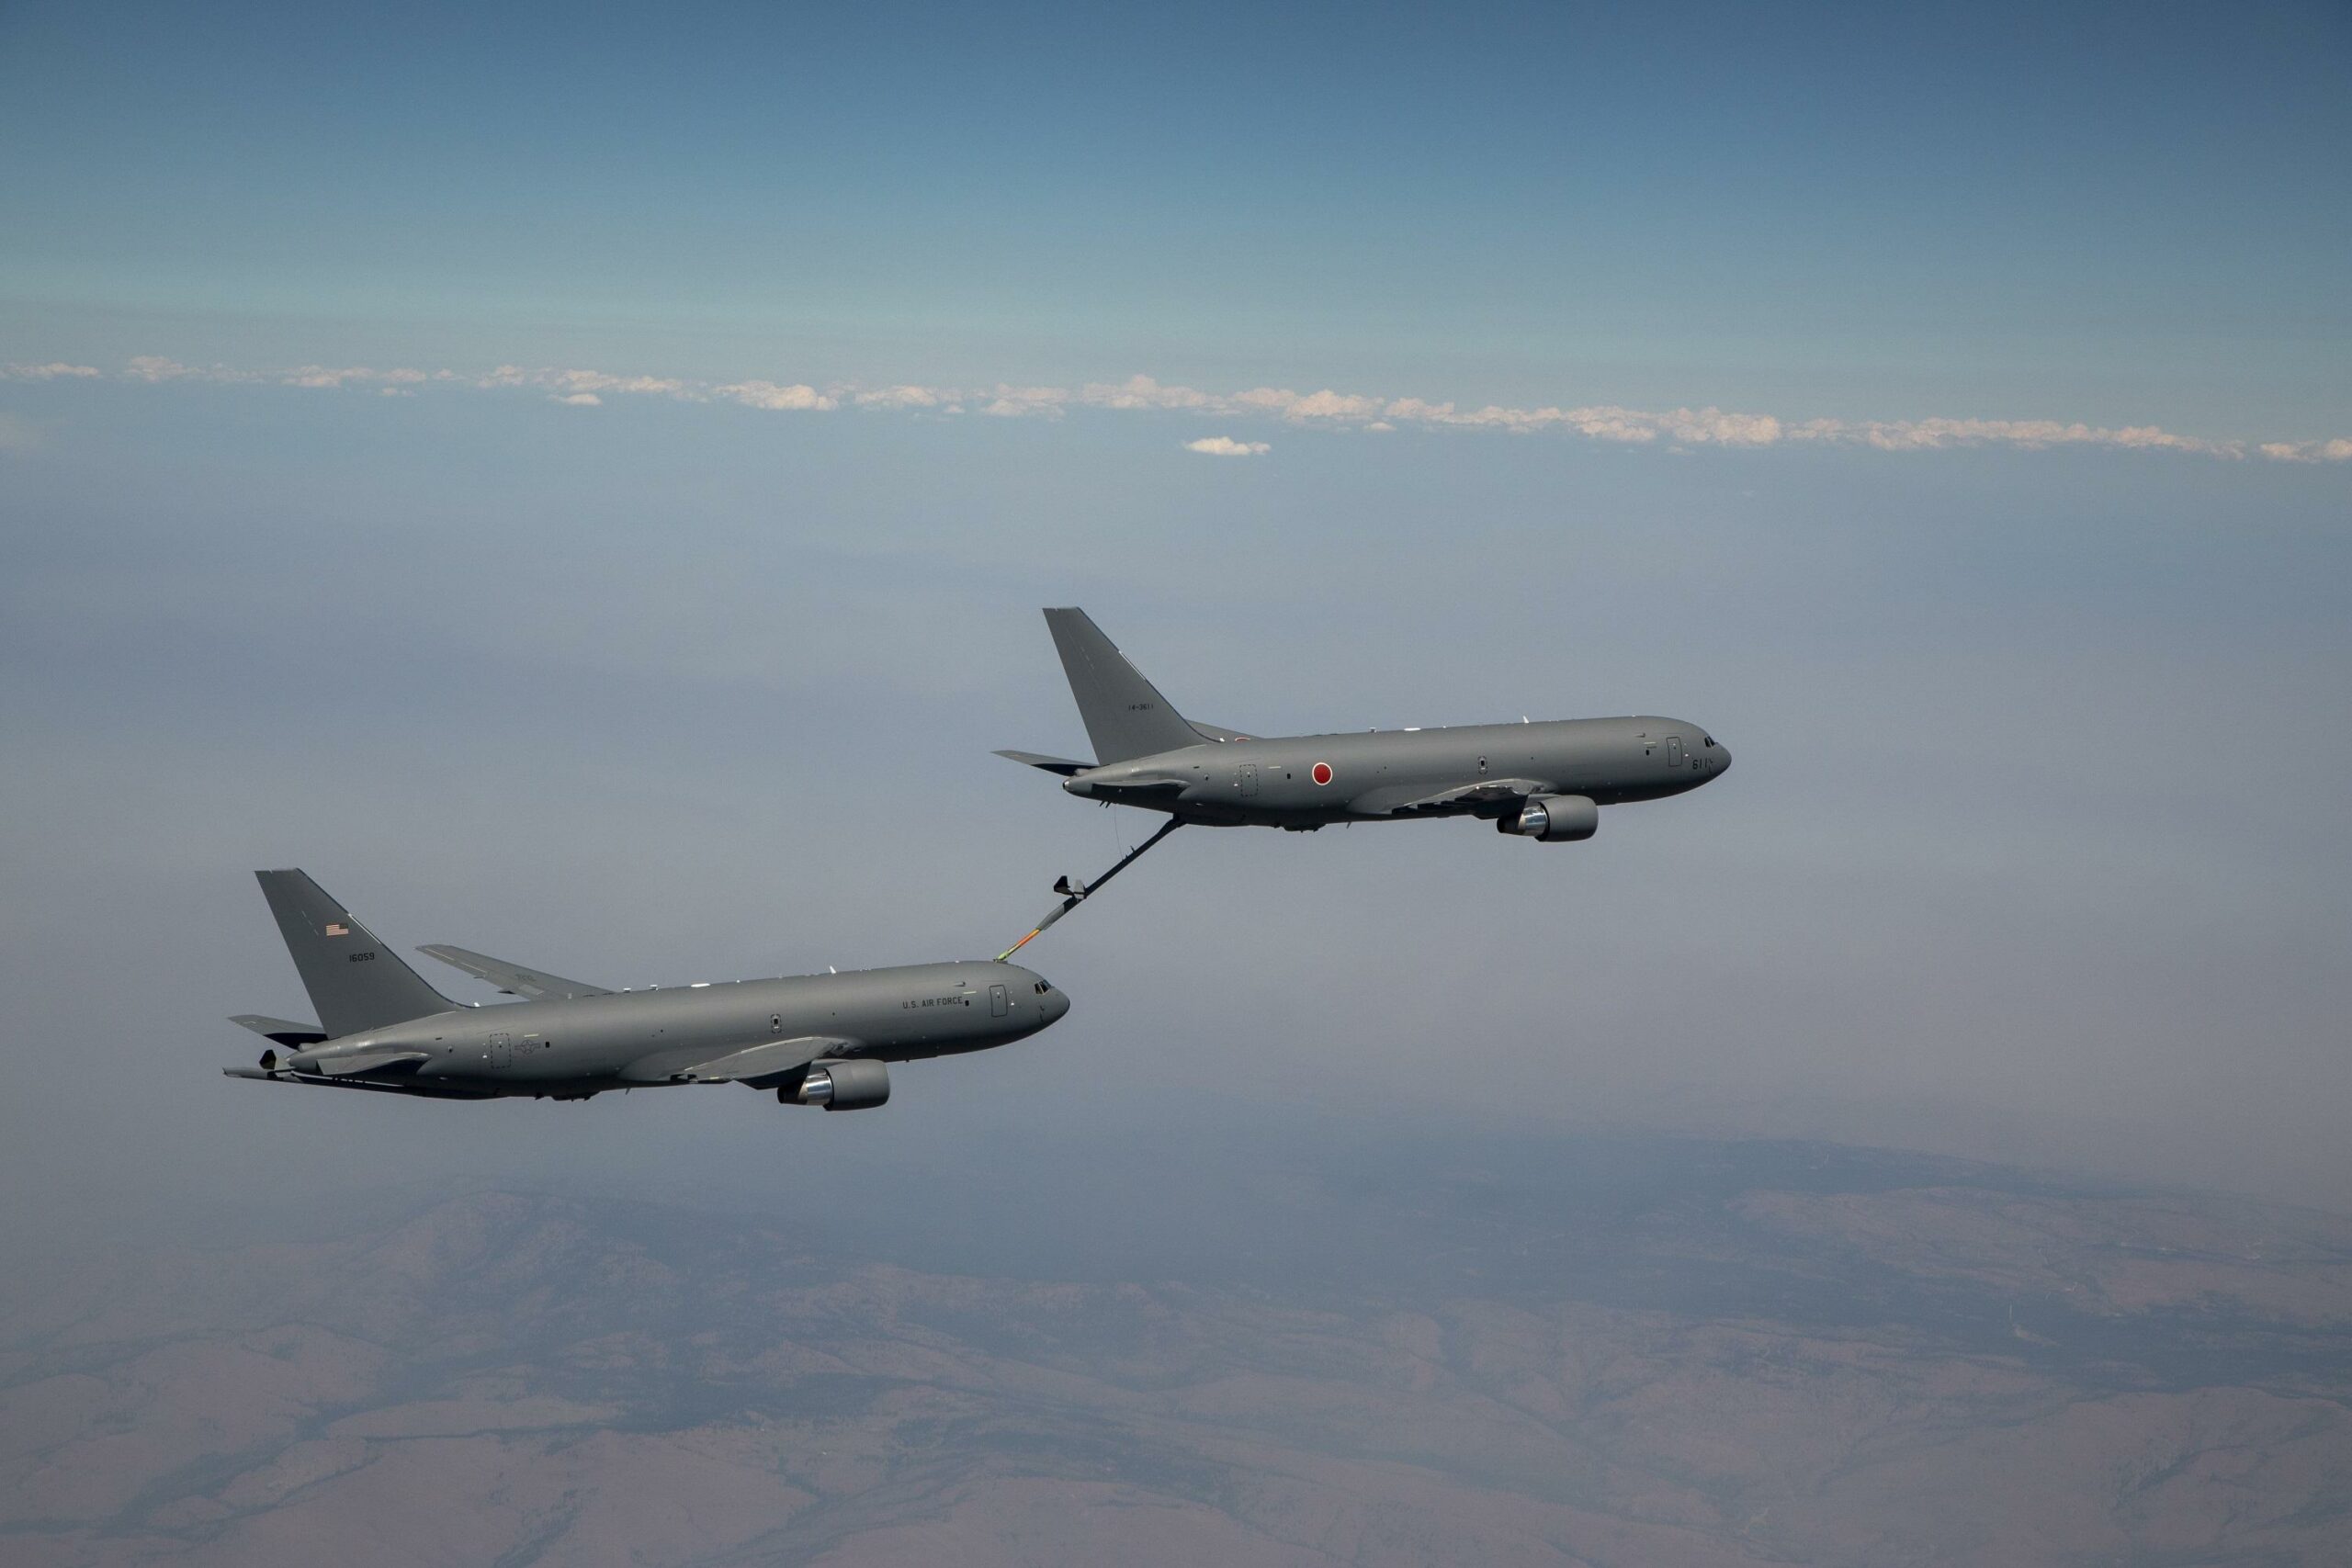 The Japan-bound tanker recently refueled another KC-46A in the skies over Washington state.